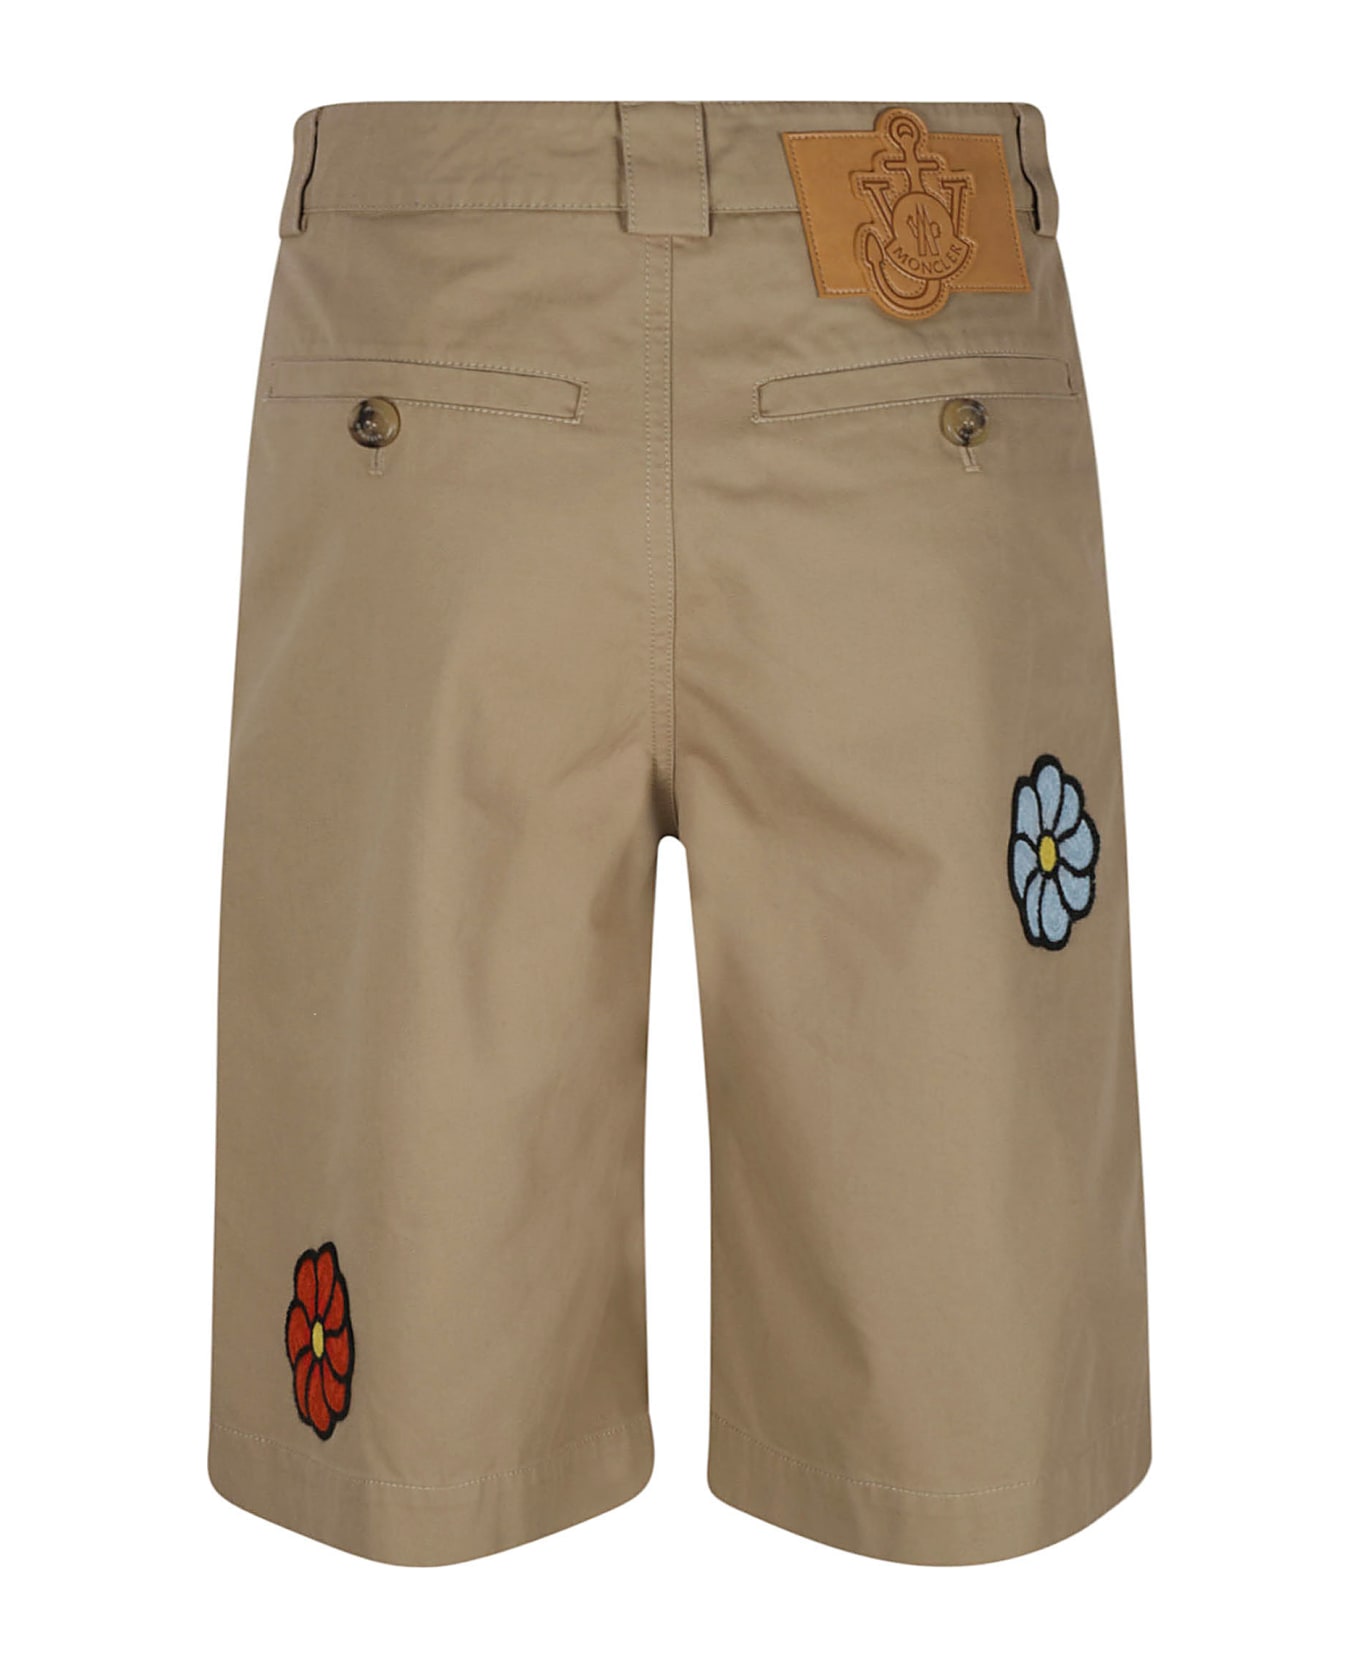 Moncler Genius Floral Embroidered Shorts - Beige